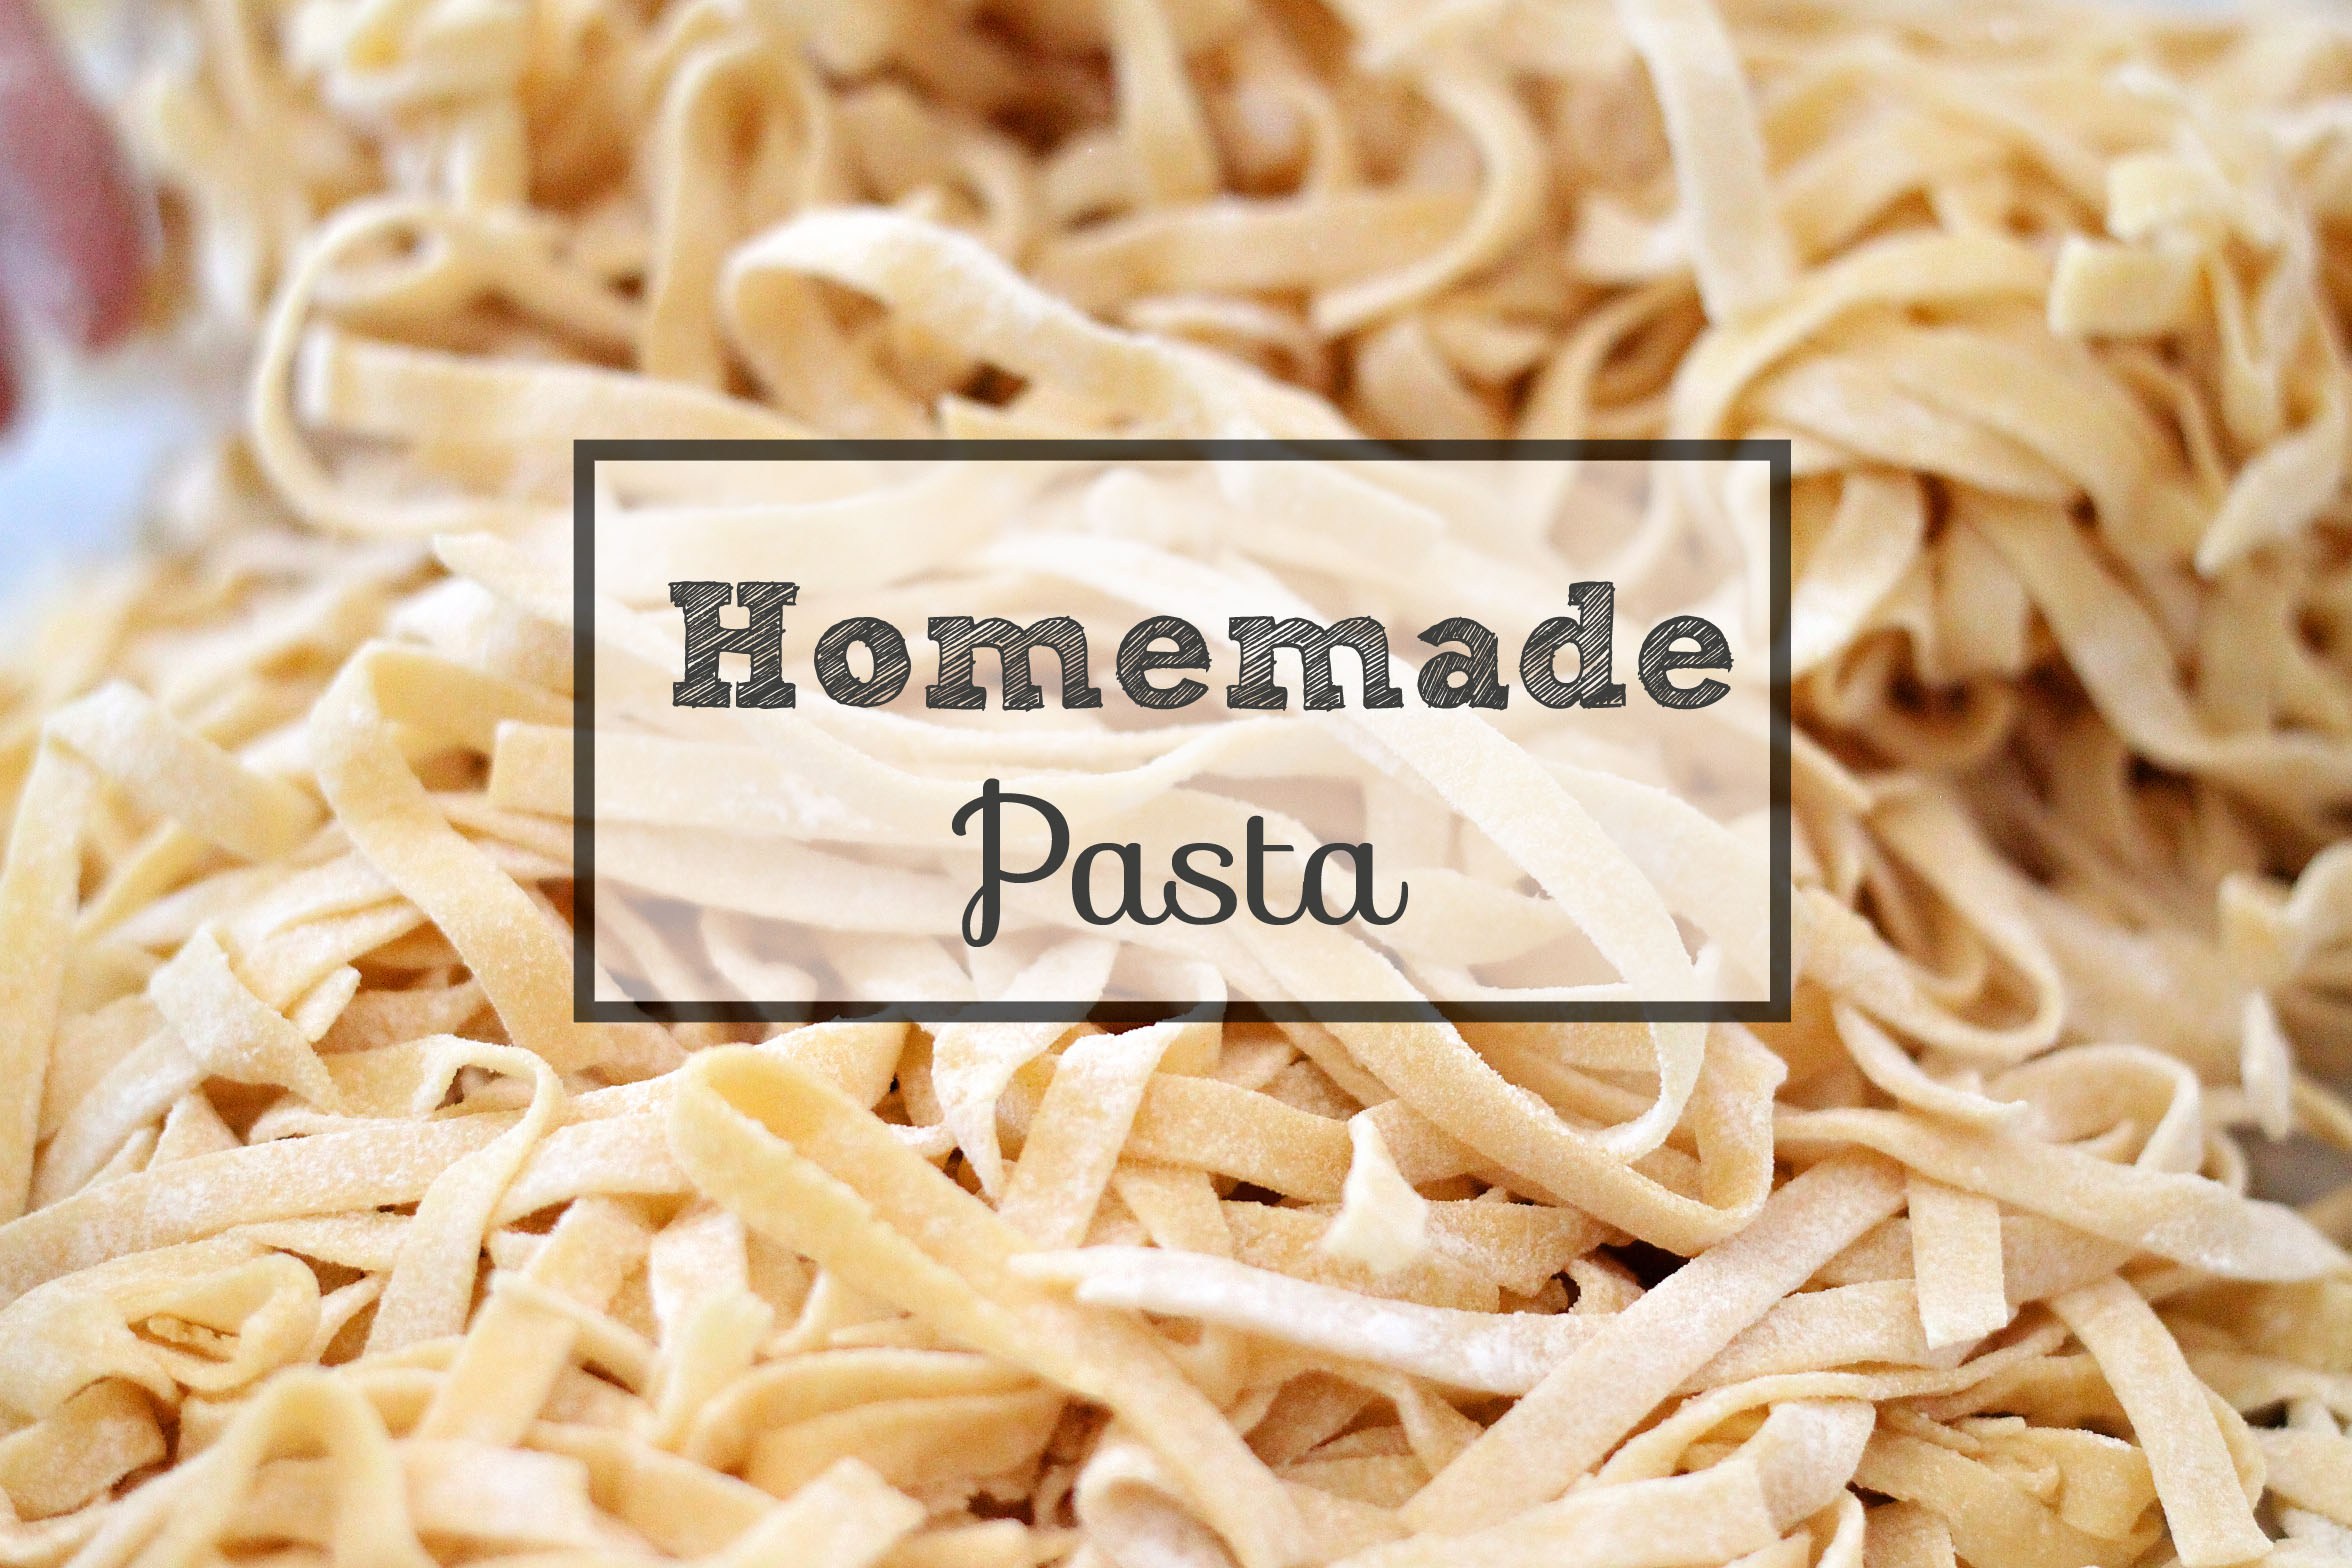 Save time when you make homemade pasta in batches